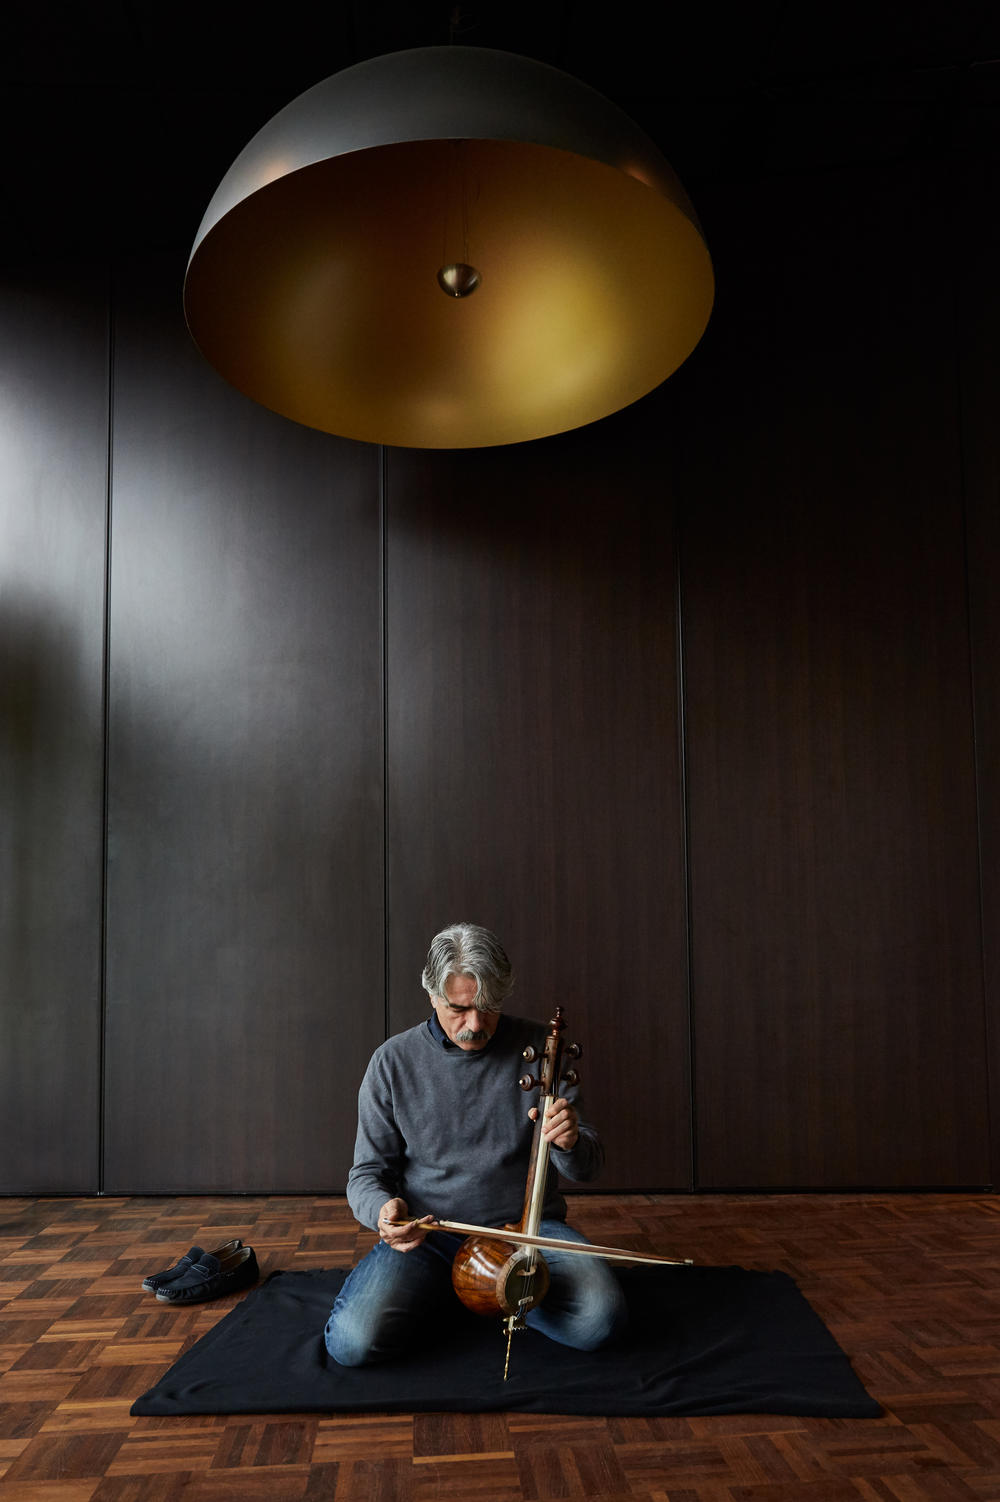 Kalhor plays the <em>kamancheh</em> in 2017. When he left Iran at age 17, he carried only two items with him: a small backpack and his main musical instrument, the <em>kamancheh</em>.